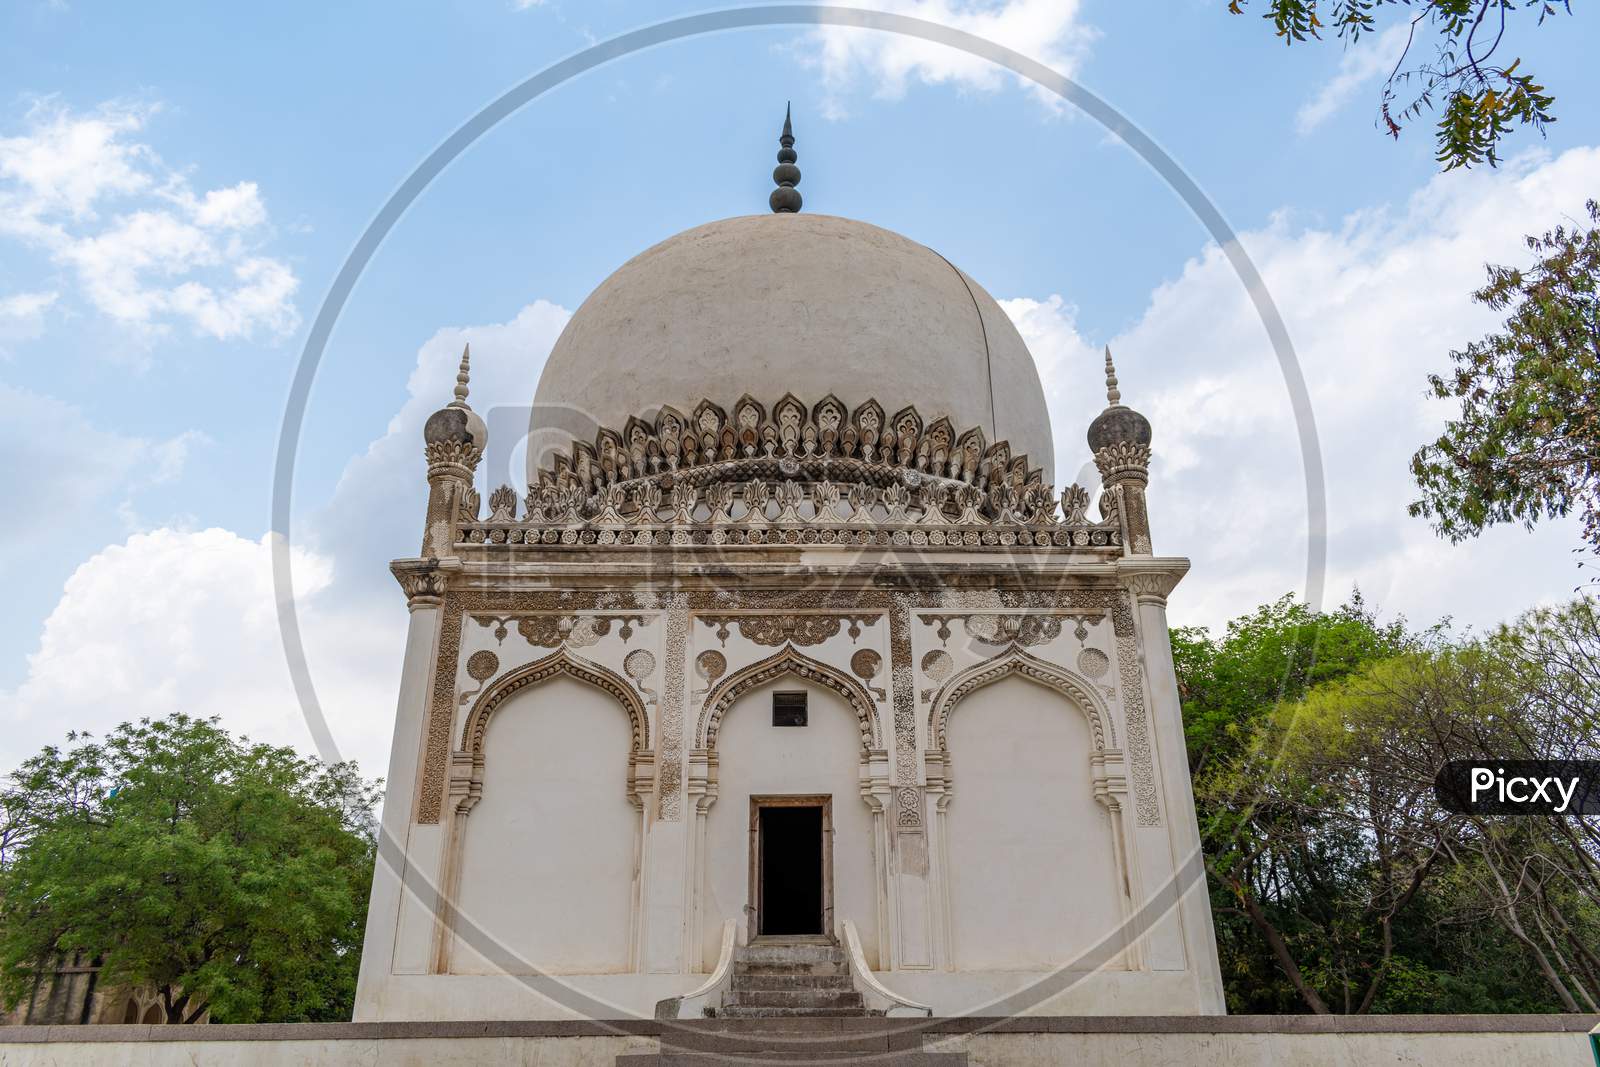 Conservation of commanders mausoleum at Tomb of Fatima Sultana at Qutb shahi heritage park hyderabad